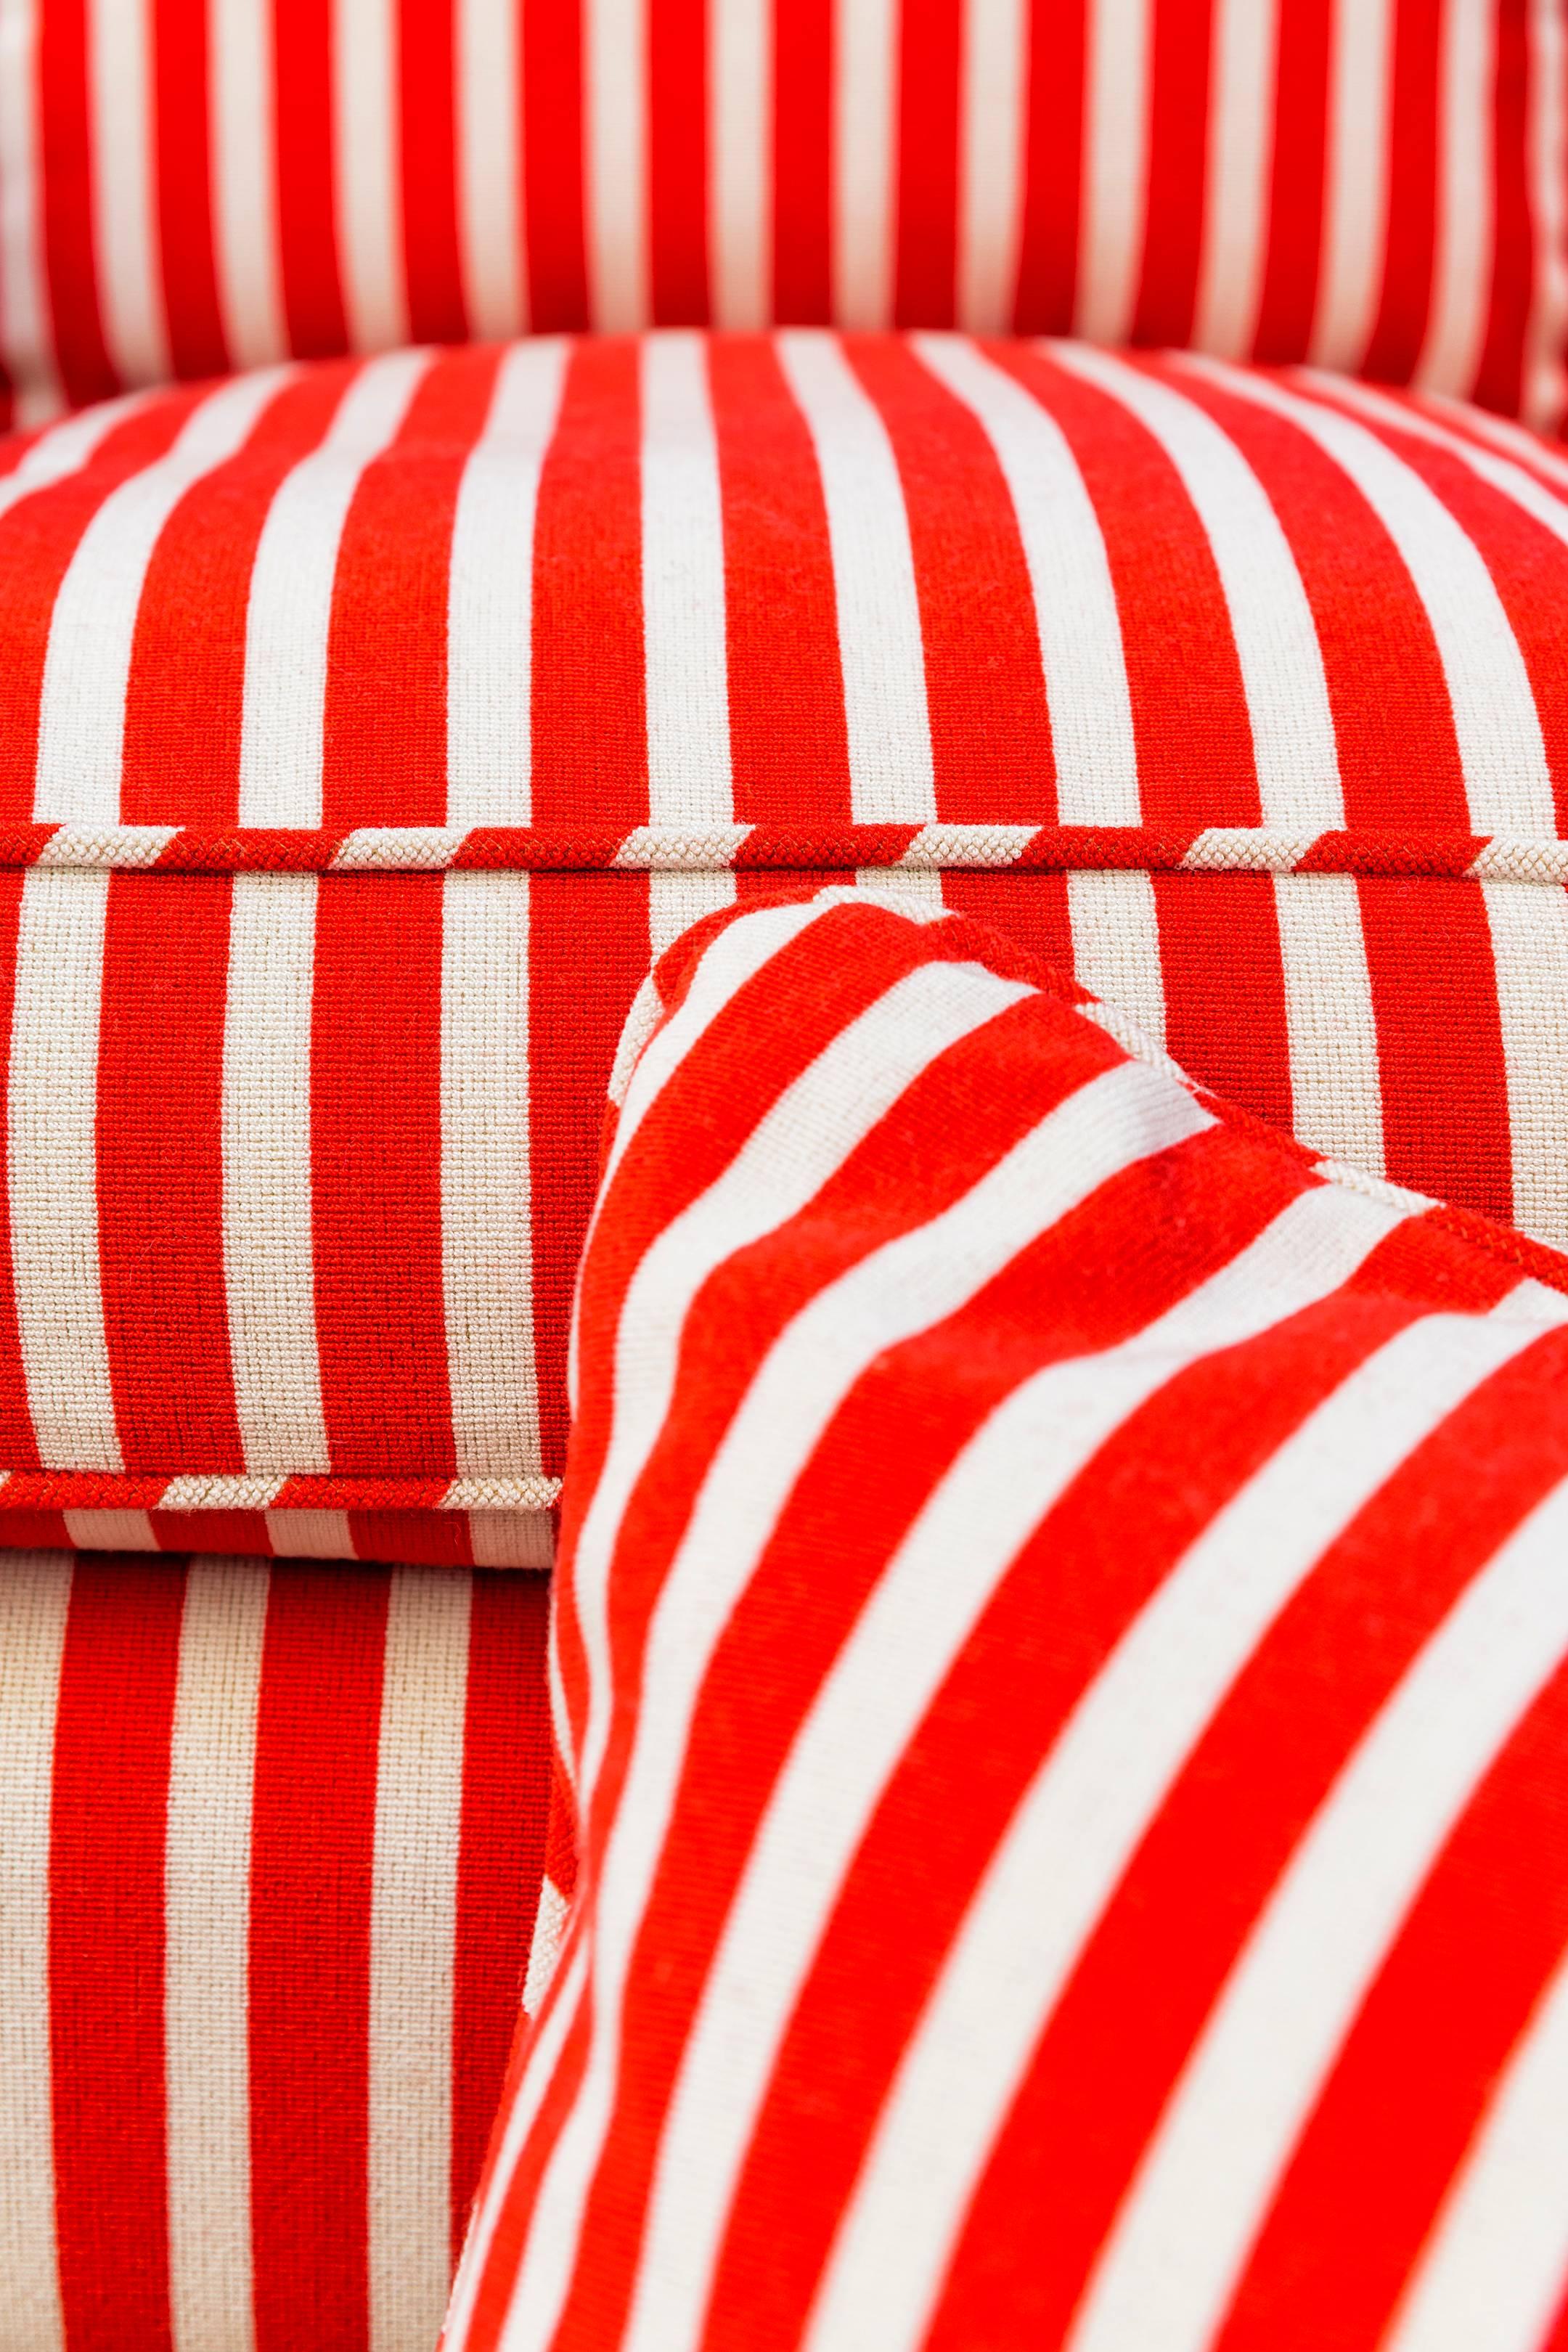 Large cushion in red and white Aeneas Epinglé by Gert Voorjans for Jim Thompson's Spring / Summer 2018 collection. 

Aeneas by Gert Voorjans for Jim Thompson:
This classic épinglé stripe is handsomely colored in bold two-color pairings. The dense